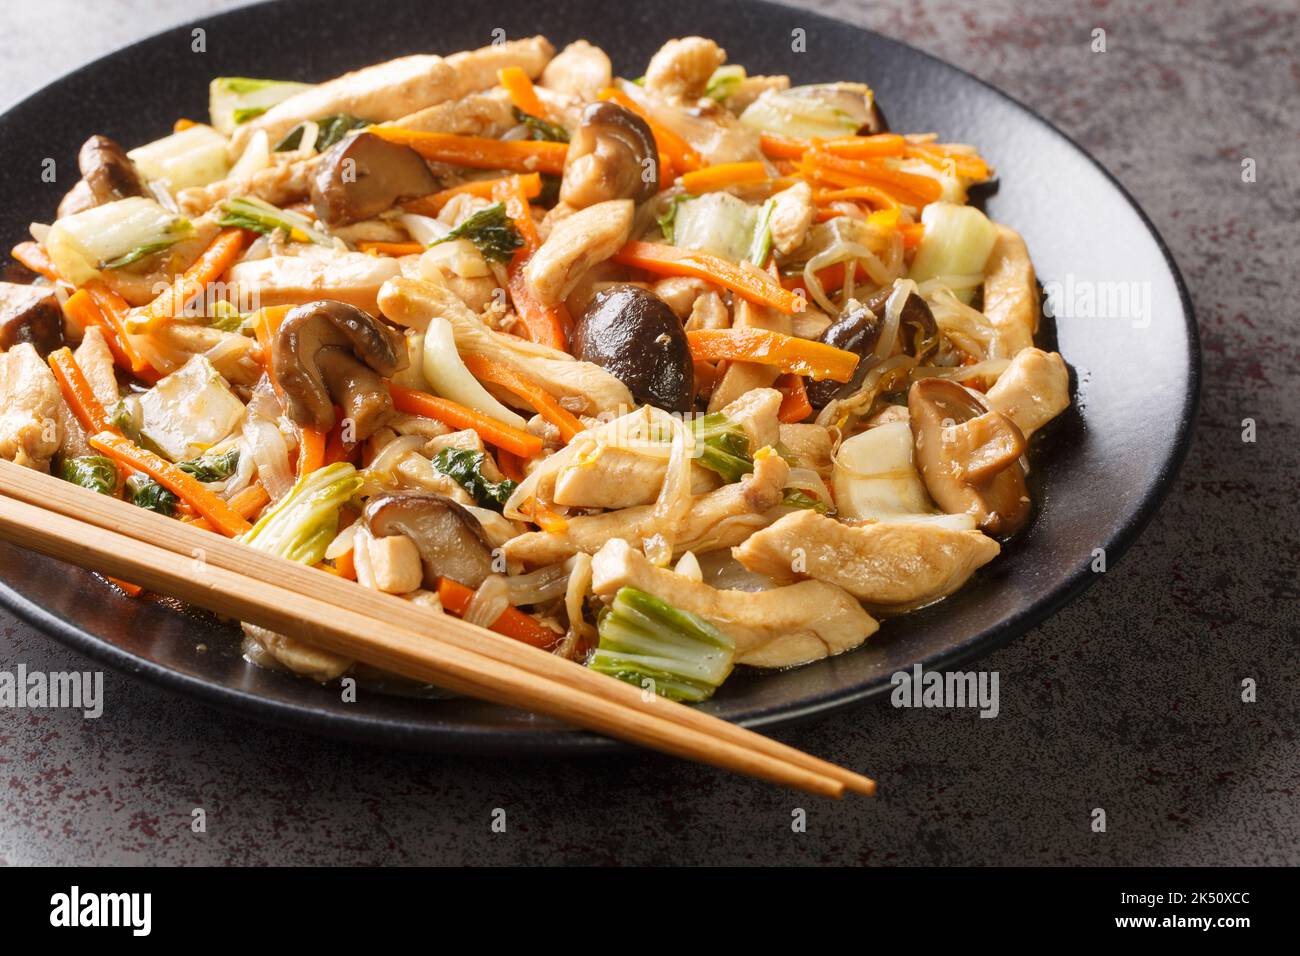 Chop Suey is a quick Chinese American stir-fry with chicken and mixed vegetables in a thick brown sauce close-up in a plate on the table. Horizontal Stock Photo